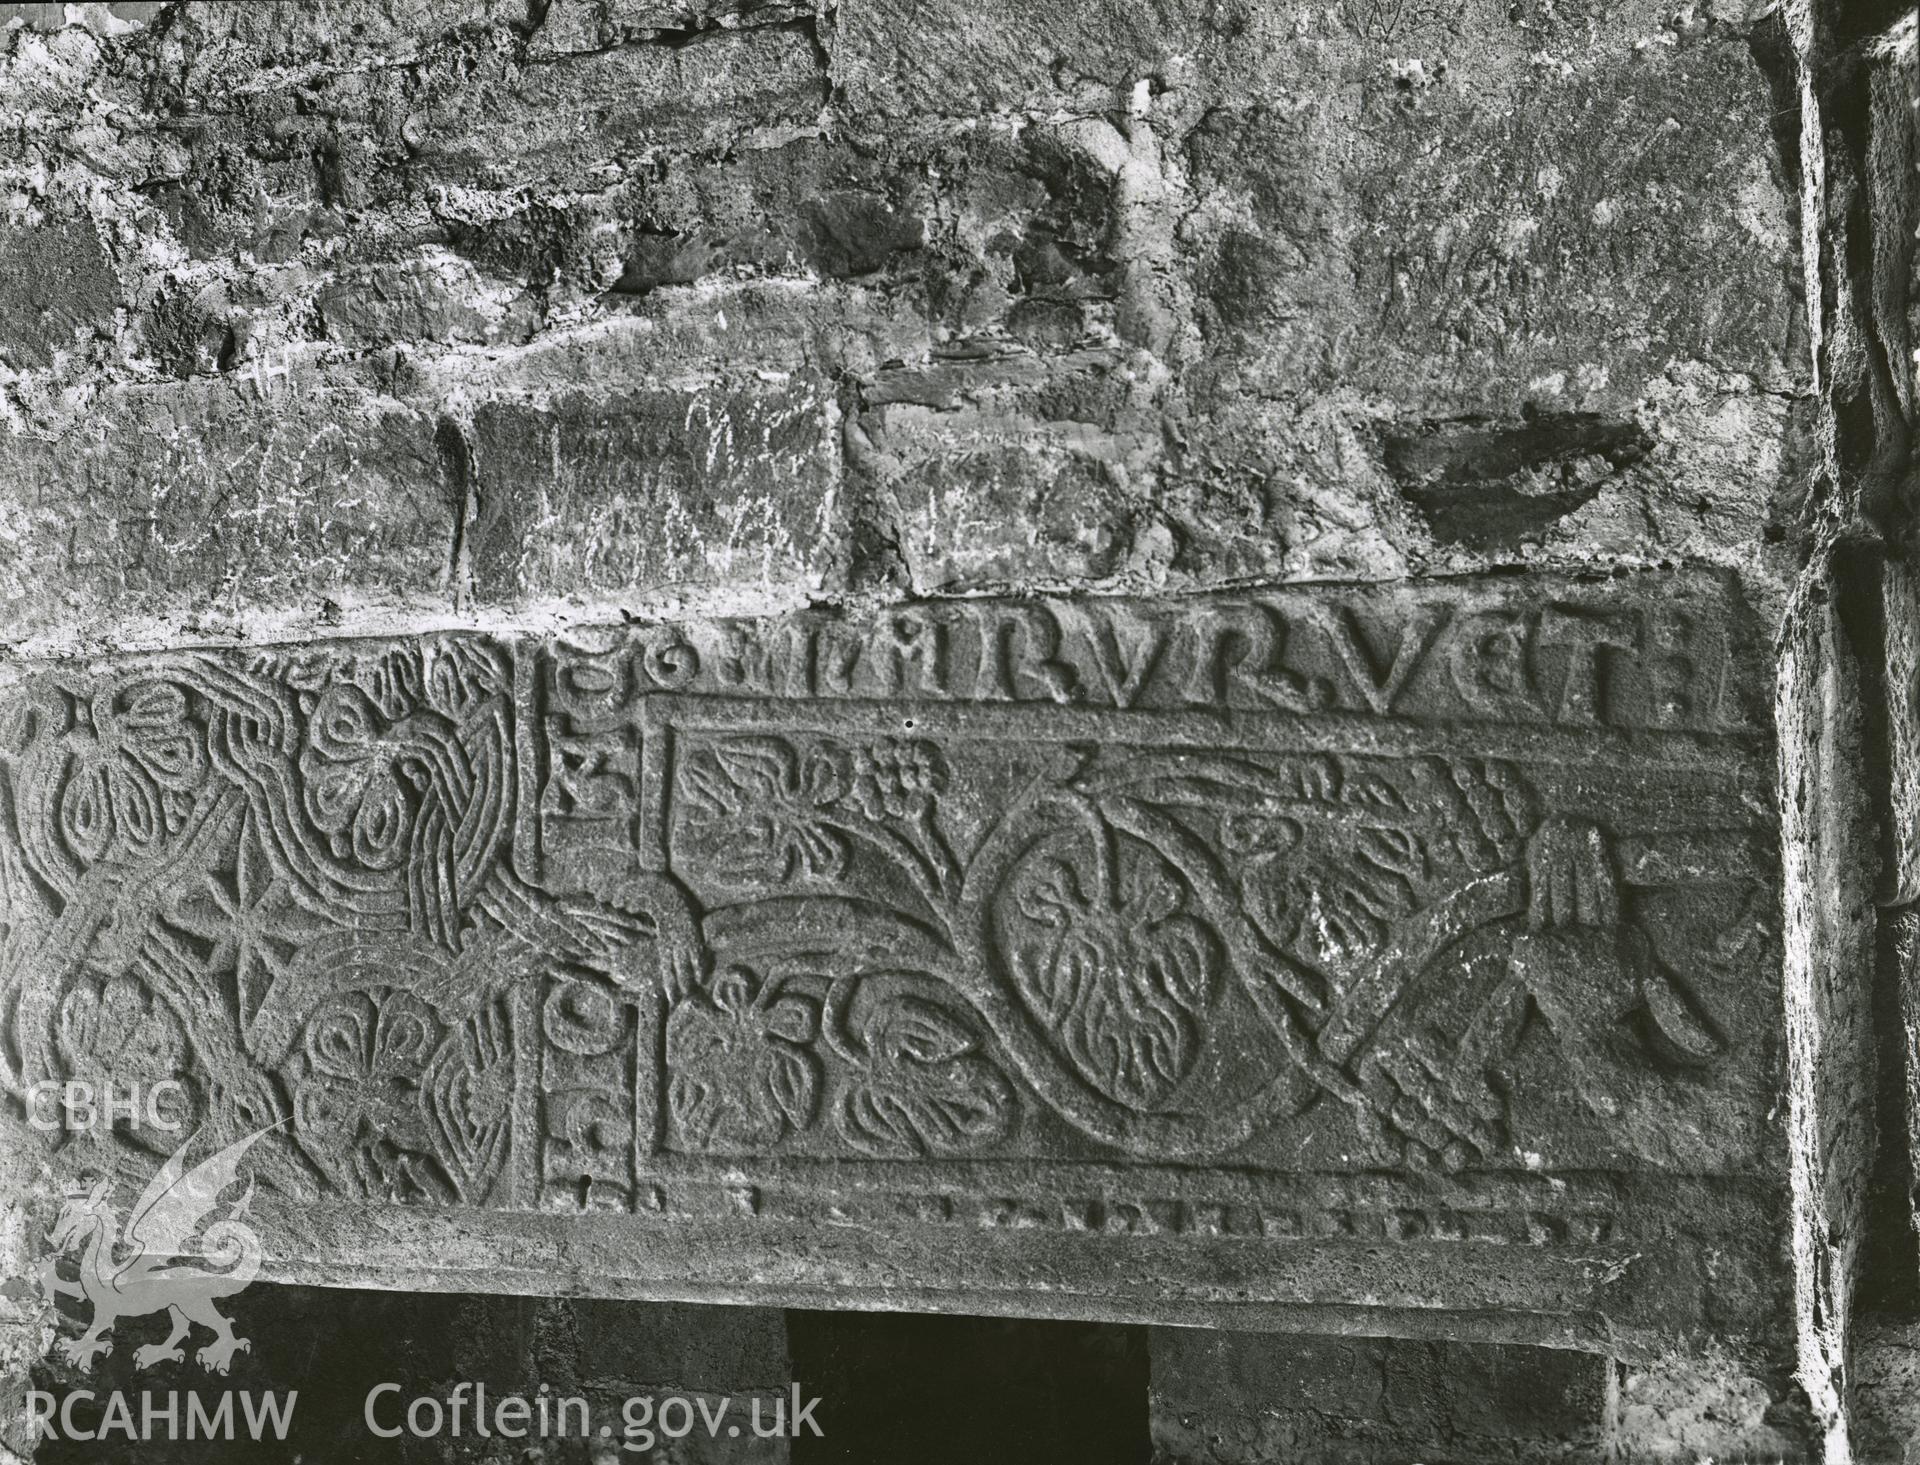 Digitised copy of a black and white photograph showing grave slab at Valle Crucis Abbey, taken by F.H. Crossley, 1949. Copied from print as negative held by NMR England (Historic England).